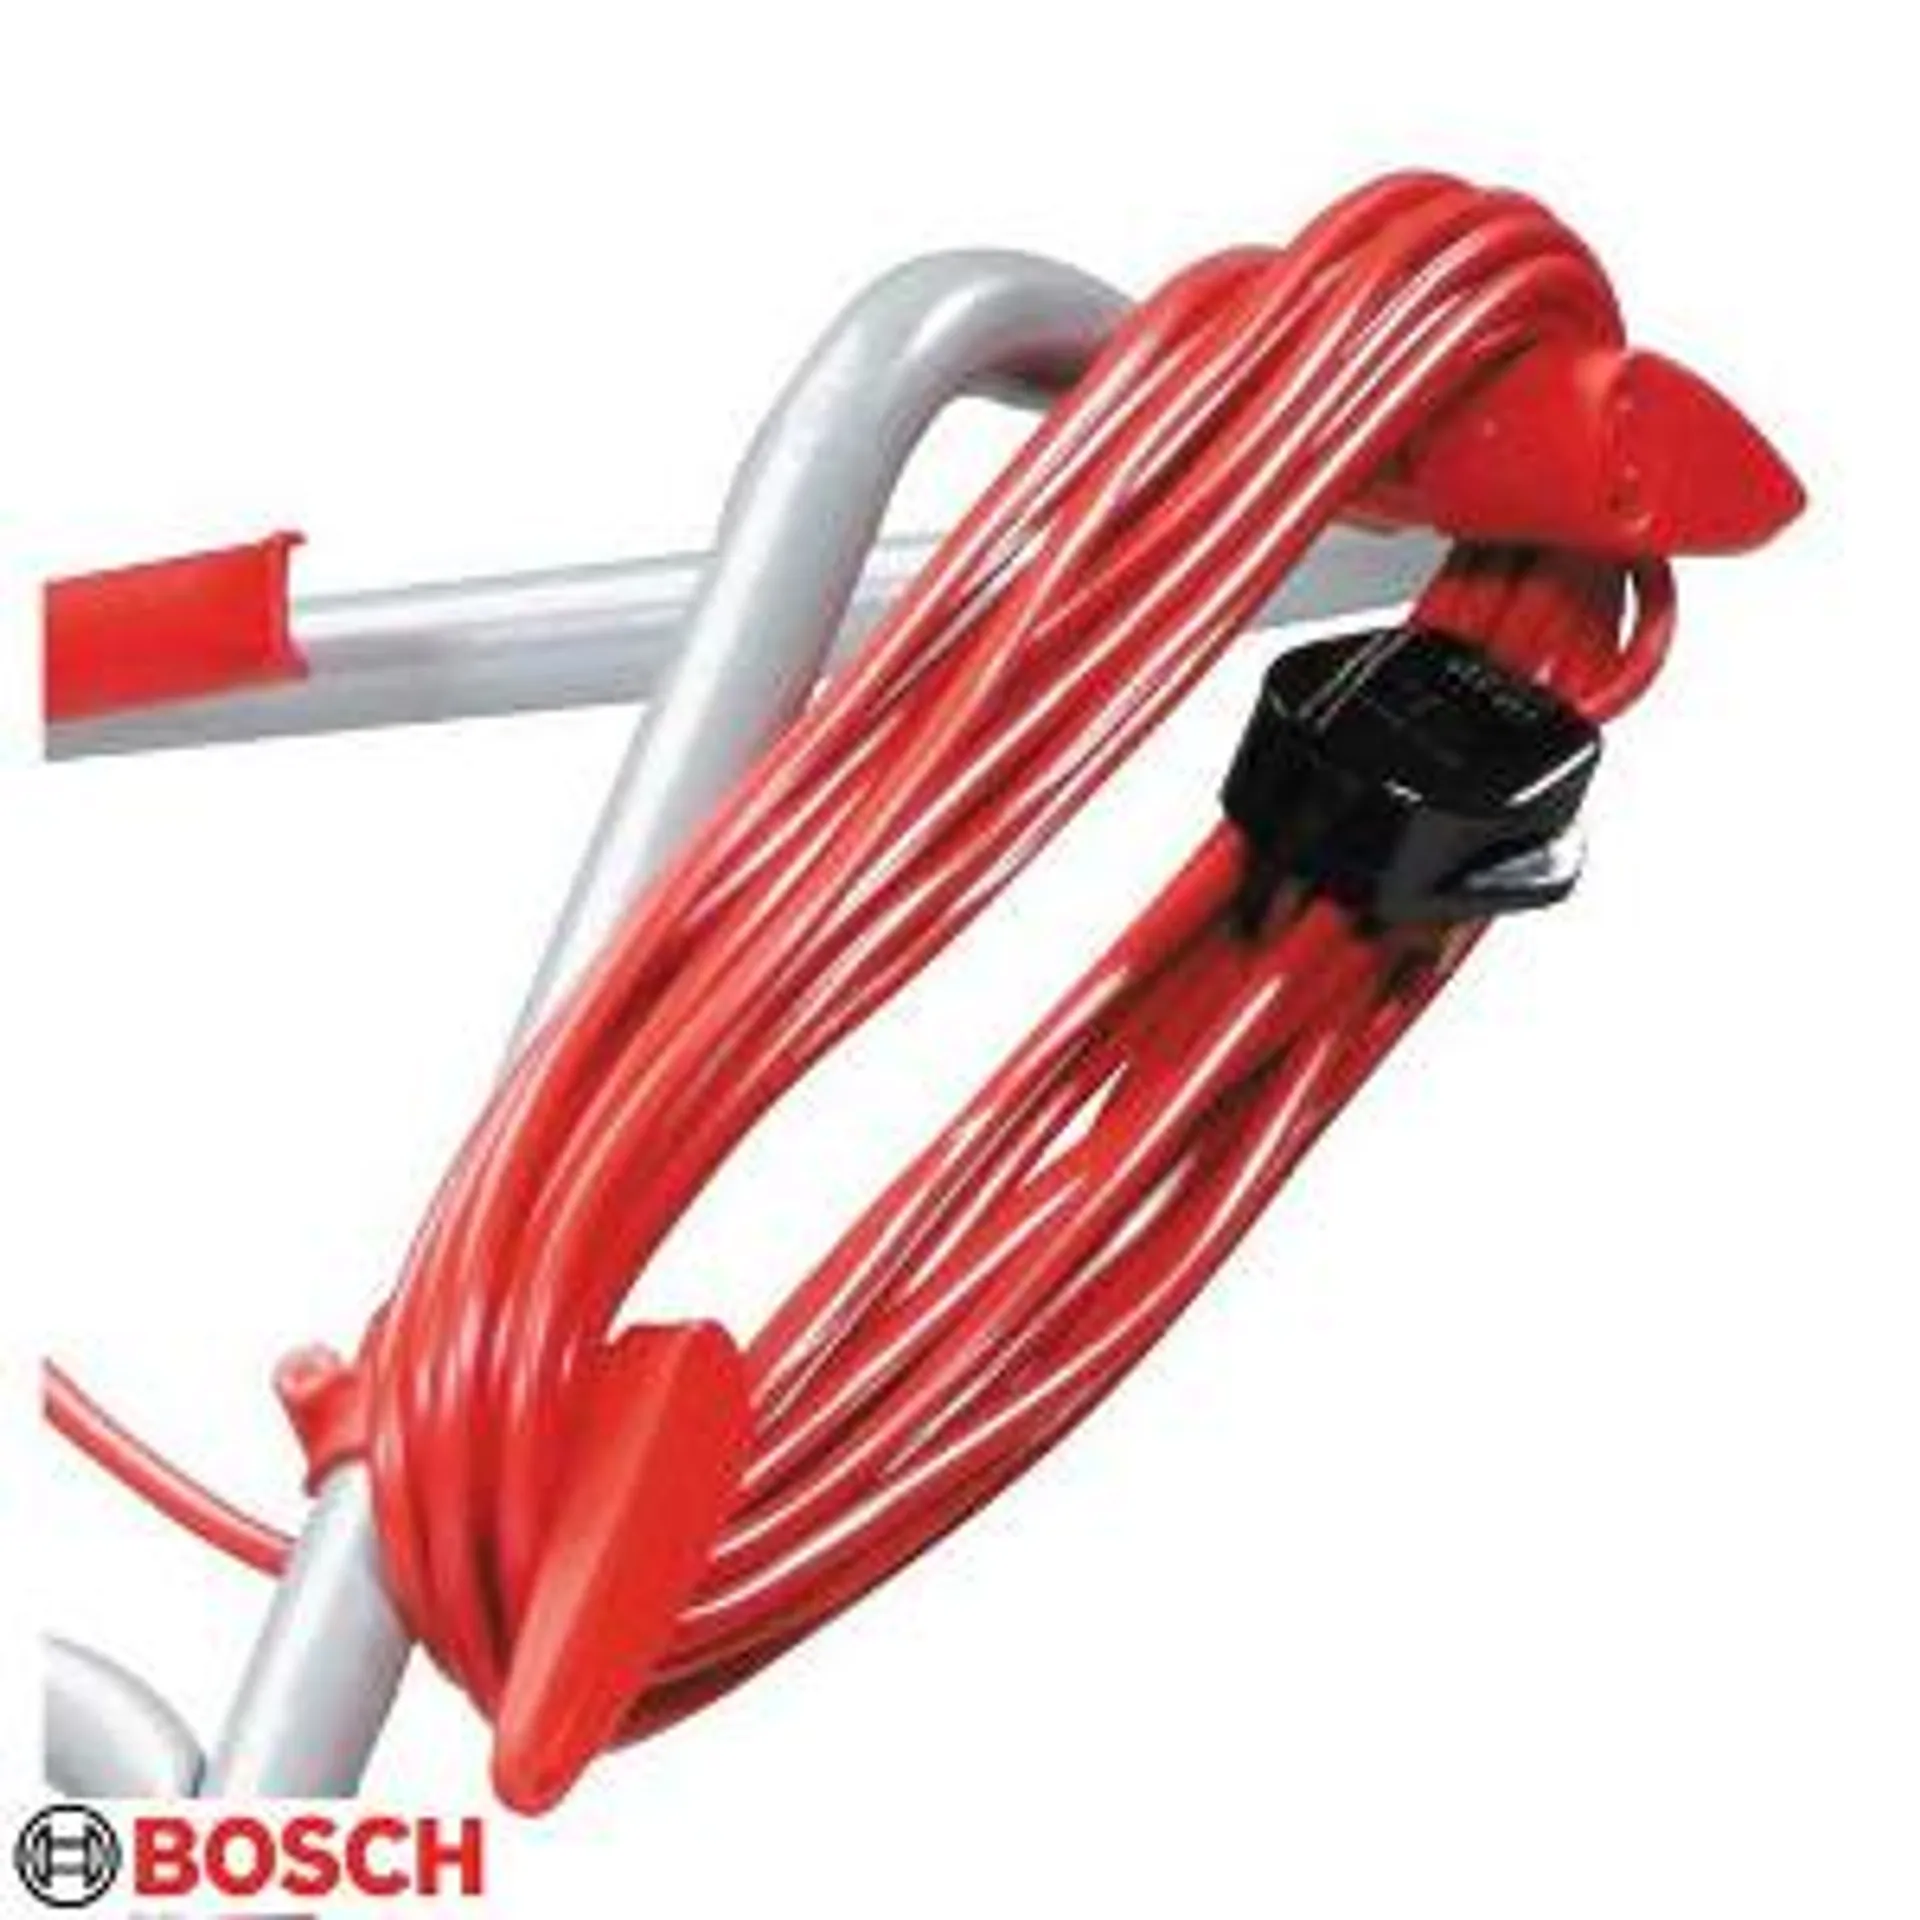 Cable Winder for all Bosch and Qualcast electric lawnmowers F016800270